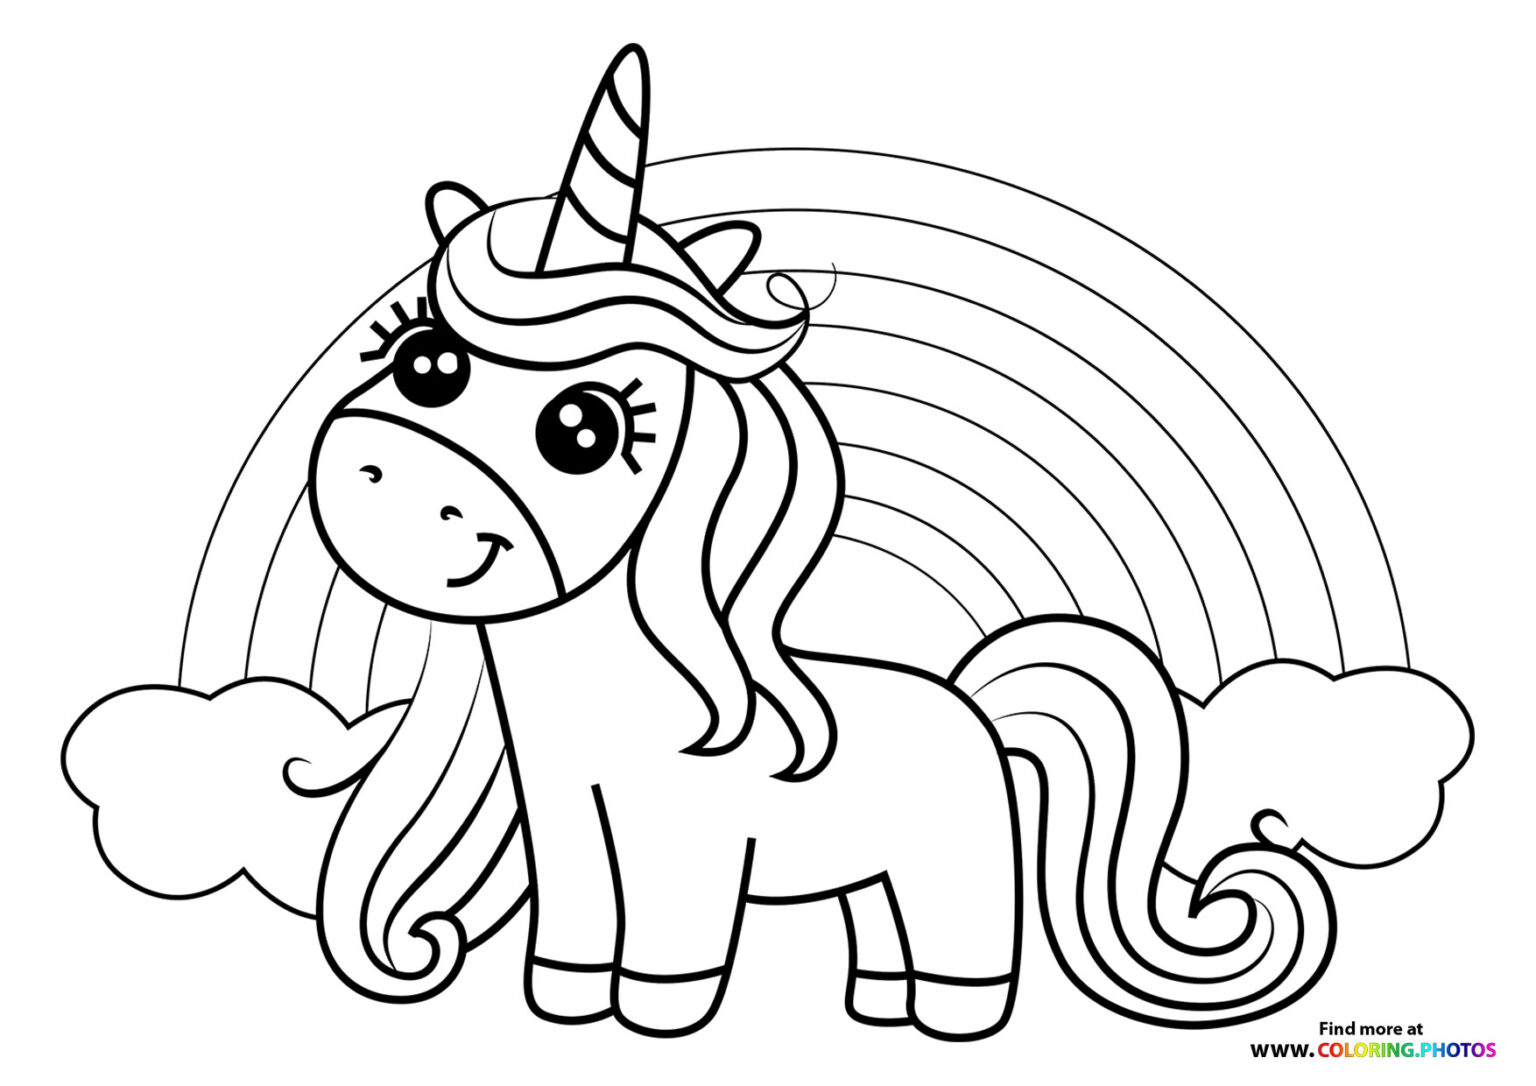 Rainbow unicorn - Coloring Pages for kids